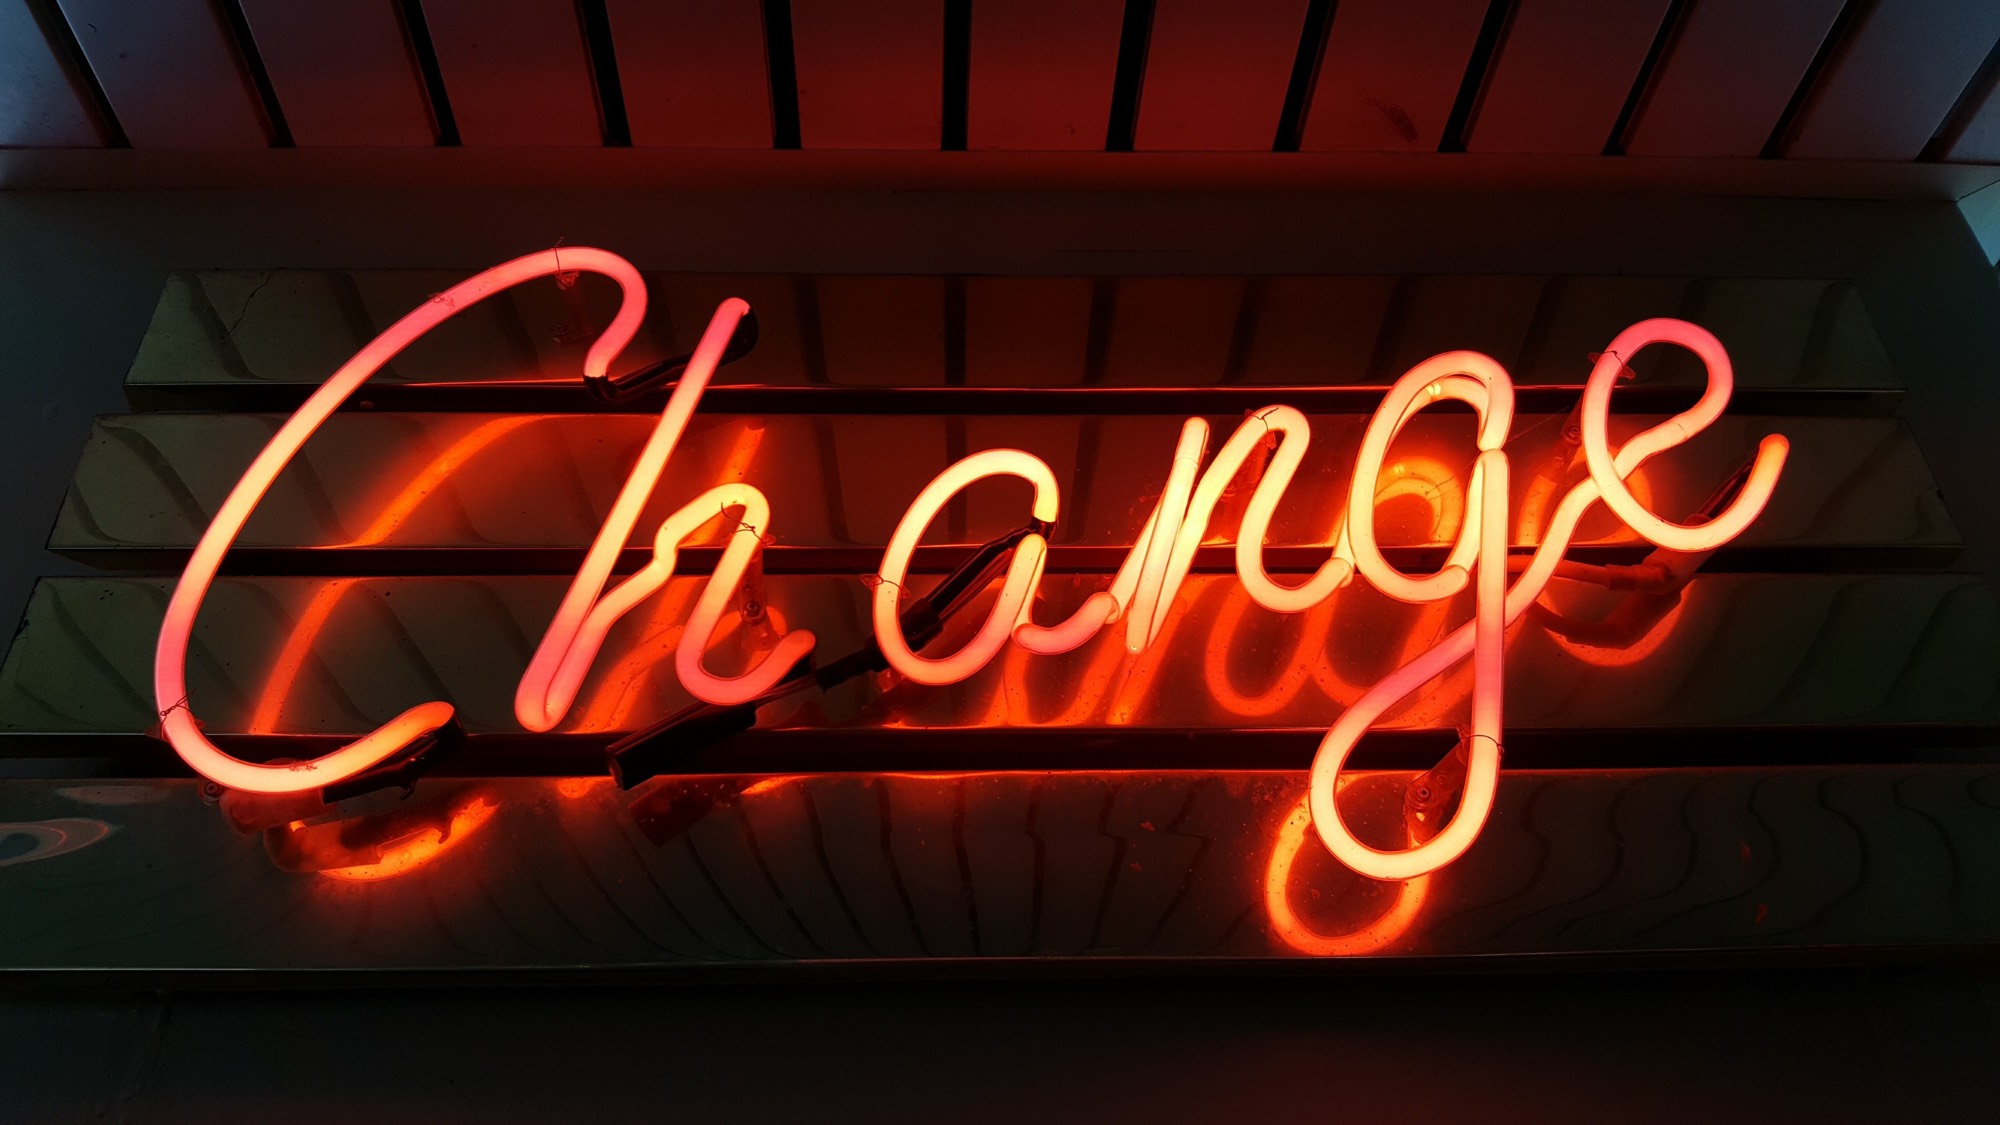 photograph of a neon sign that reads "Change"